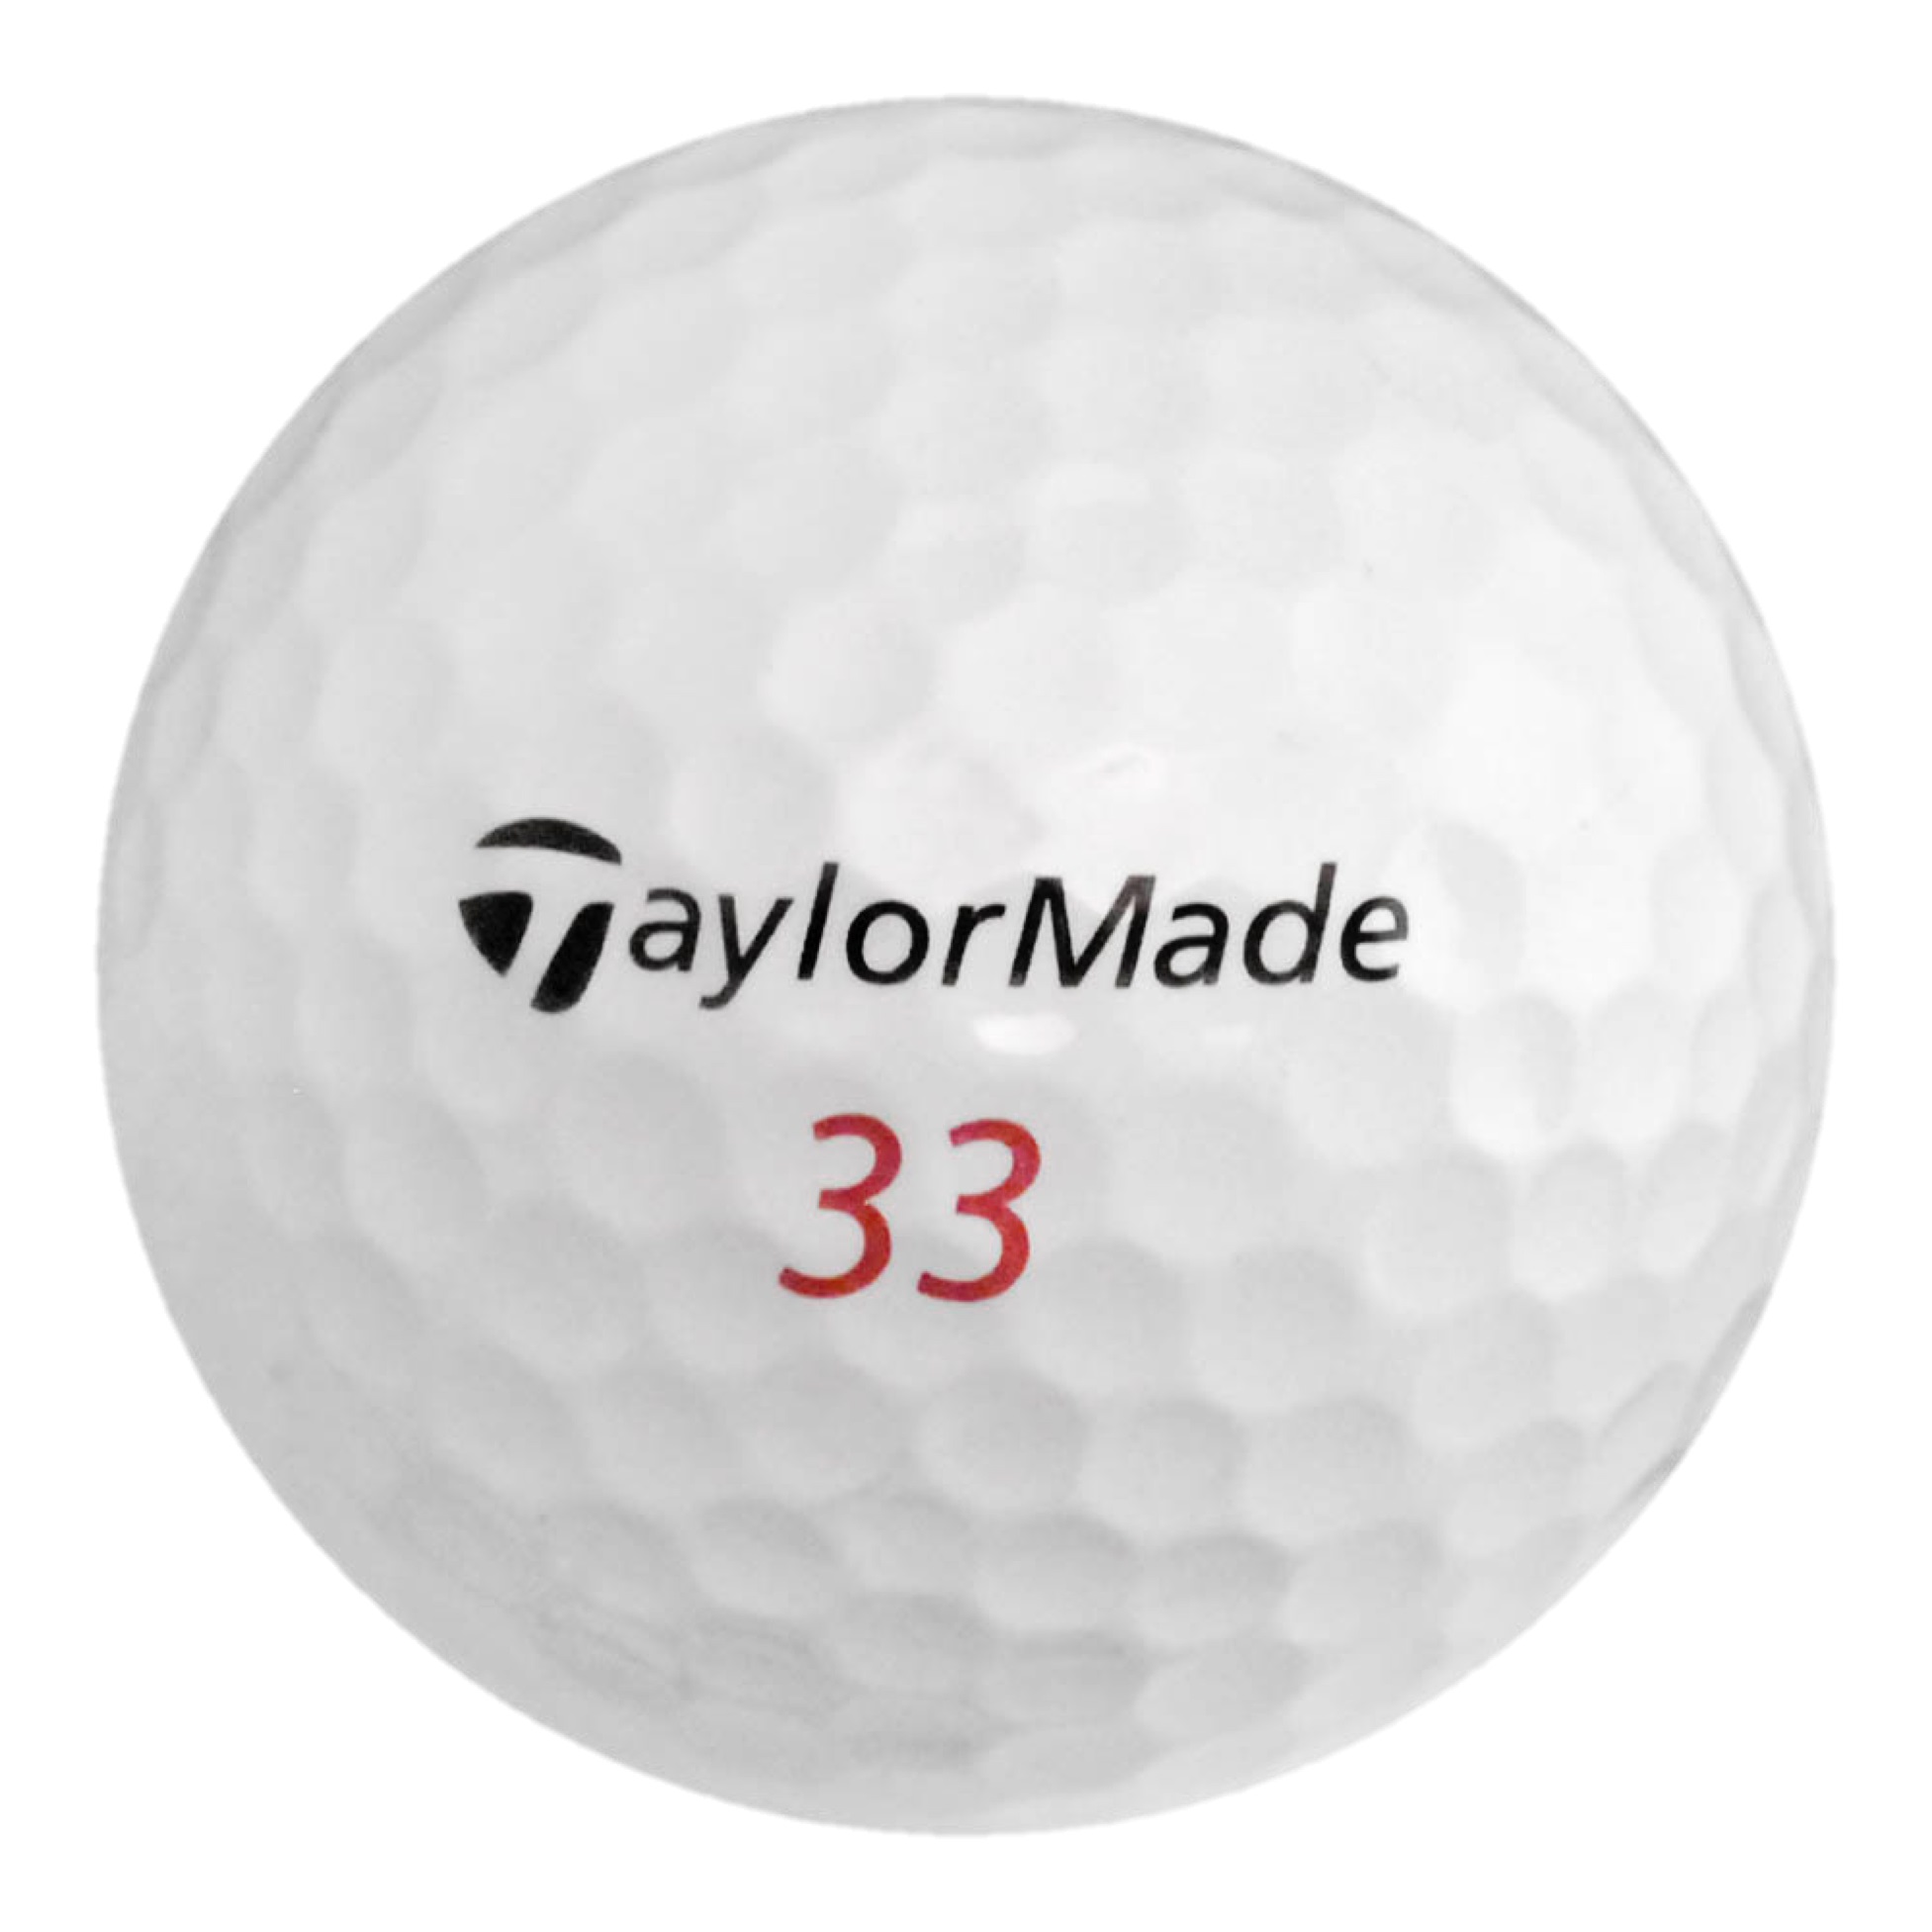 84 TaylorMade Project (a) - Value (AAA) Grade - Recycled (Used) Golf Balls